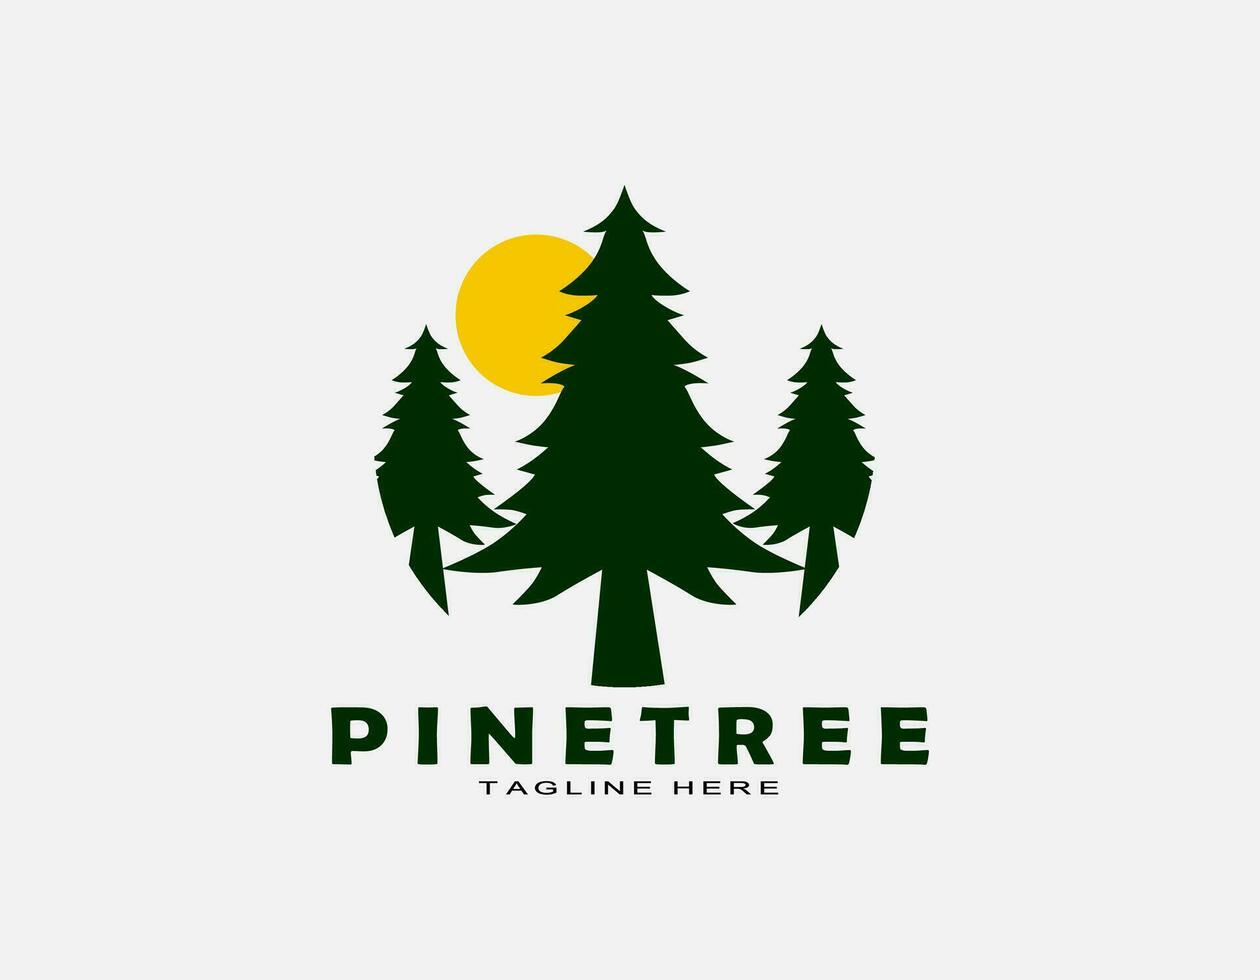 Triple pine trees with sun. Simple design logo with green that suitable for forest, travel, adventure, wildlife. vector